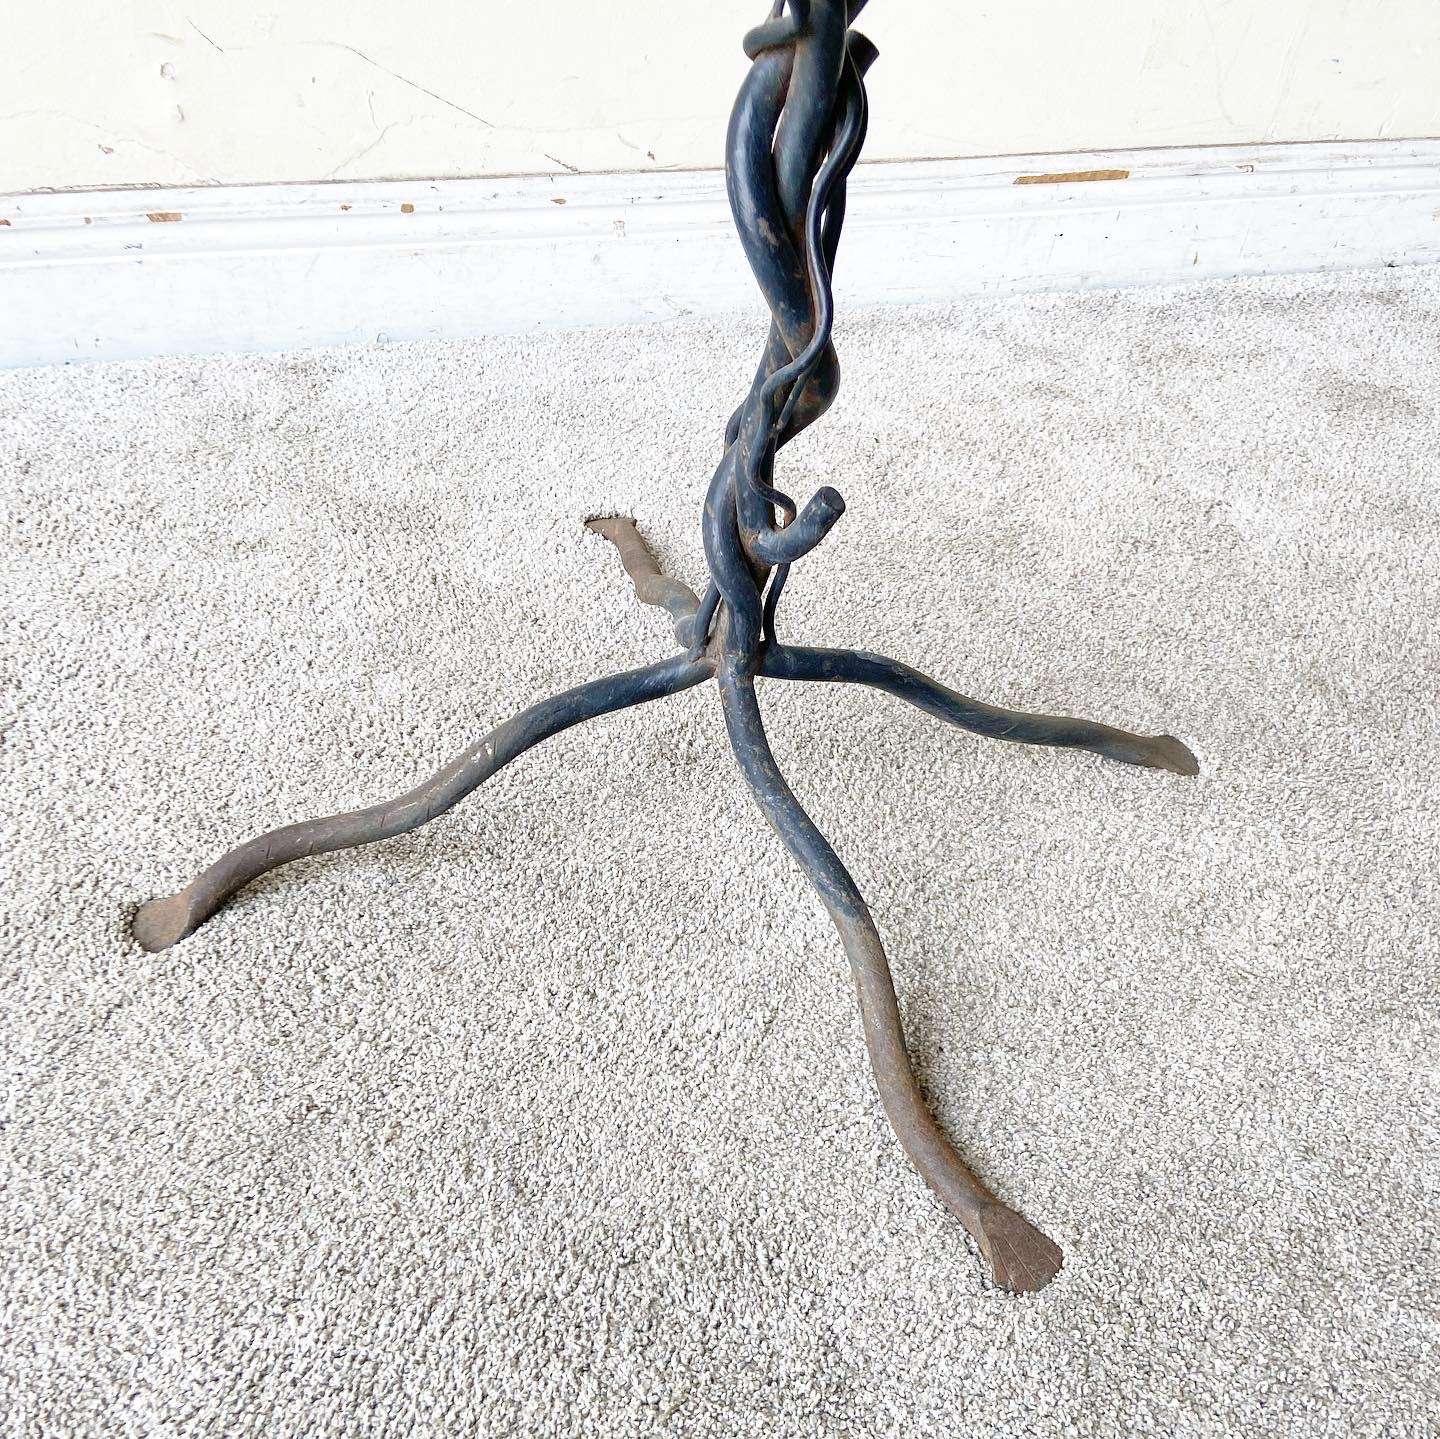 Exceptional vintage organic wrought iron tree sculpture. Each branch is detachable.
